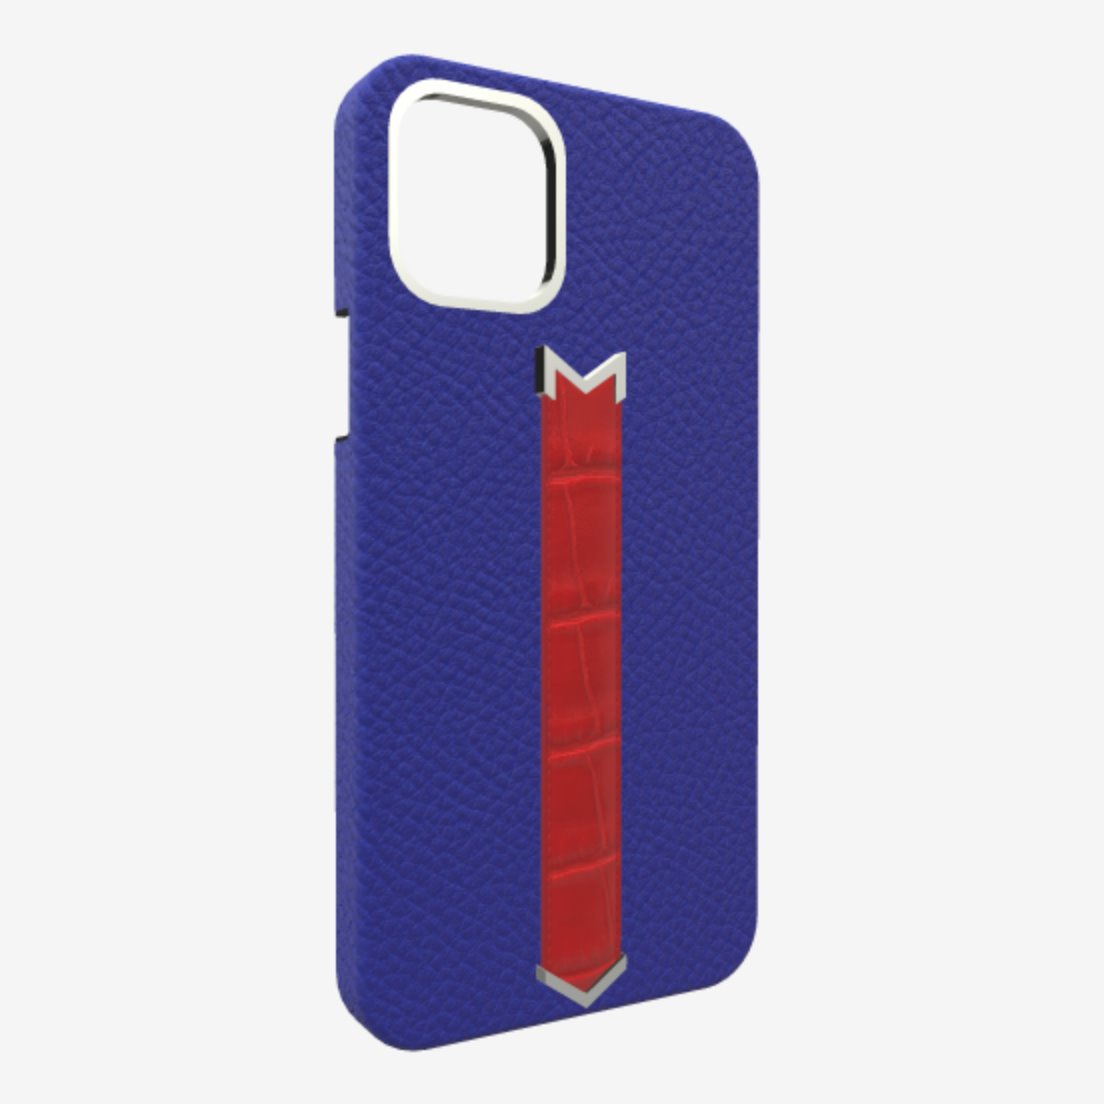 Silver Finger Strap Case for iPhone 13 Pro Max in Genuine Calfskin and Alligator Electric-Blue Glamour-Red 